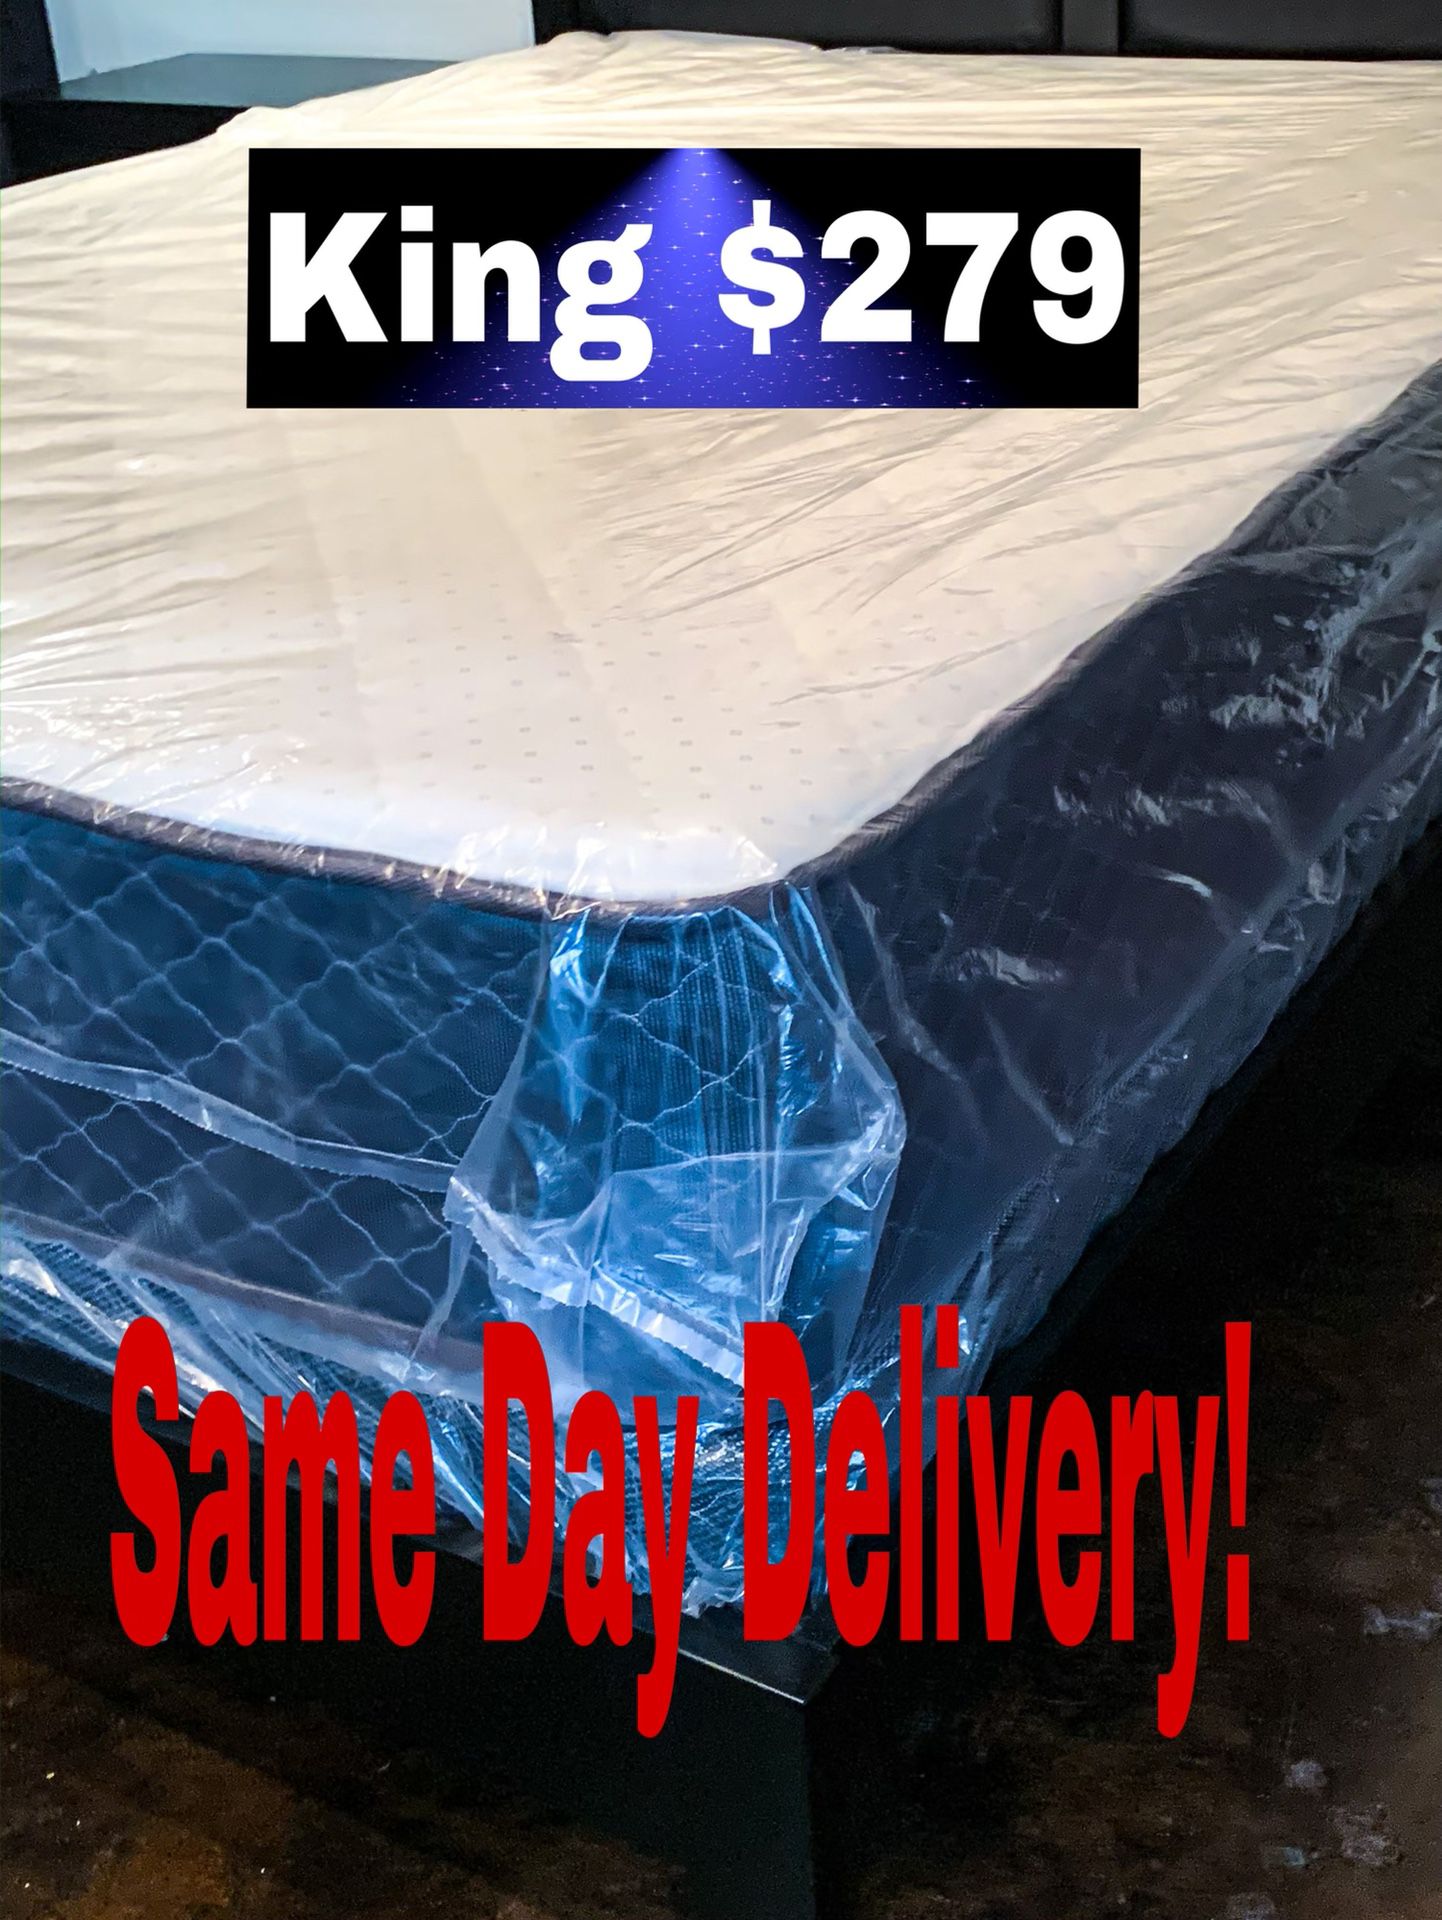 Brand New King Size Plush Mattress And Box Springs / Same Day Delivery 